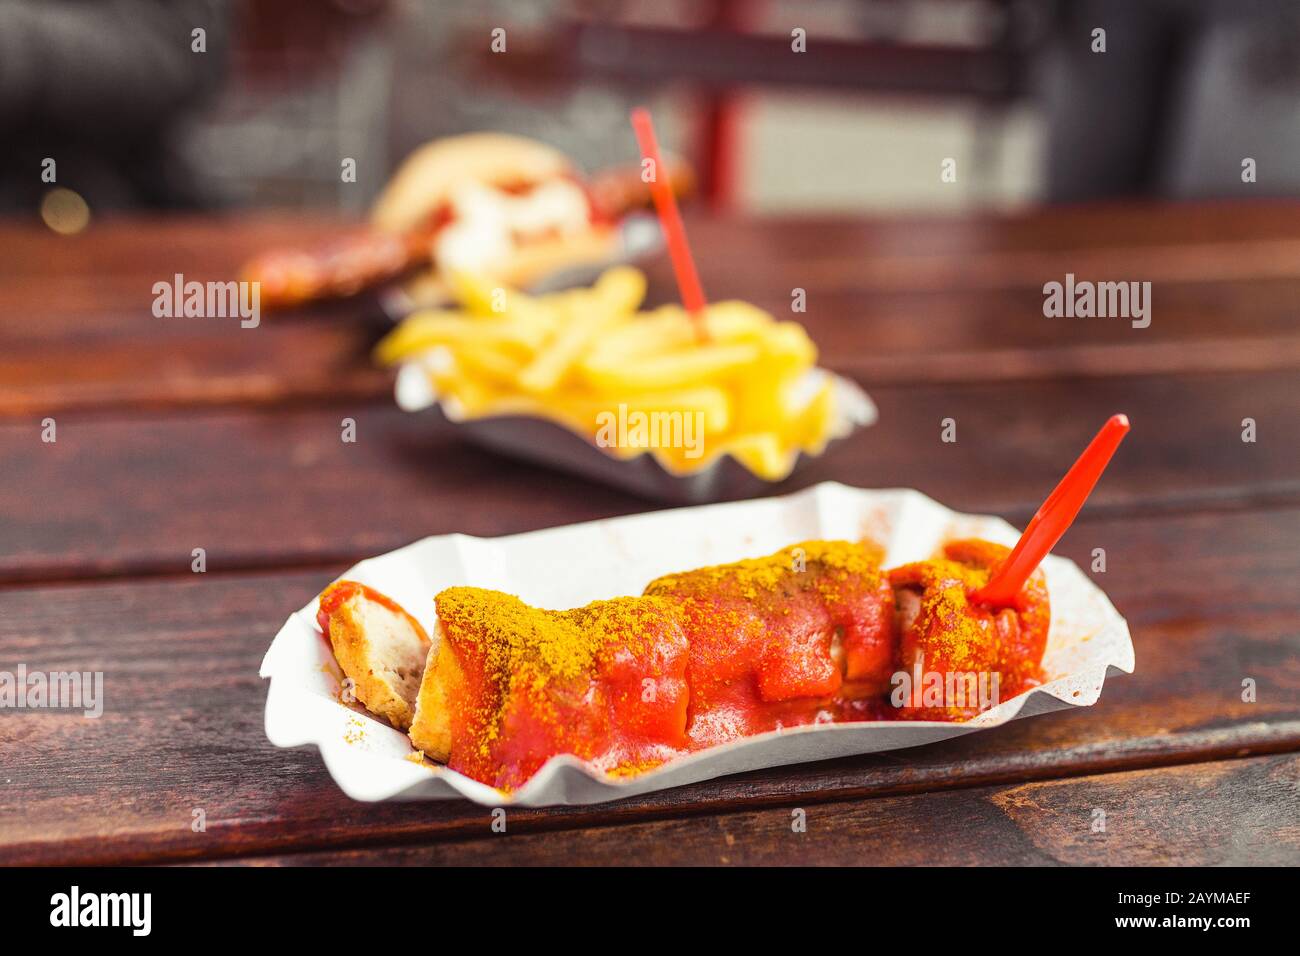 German curry wurst sausage with french fries, street food concept Stock Photo